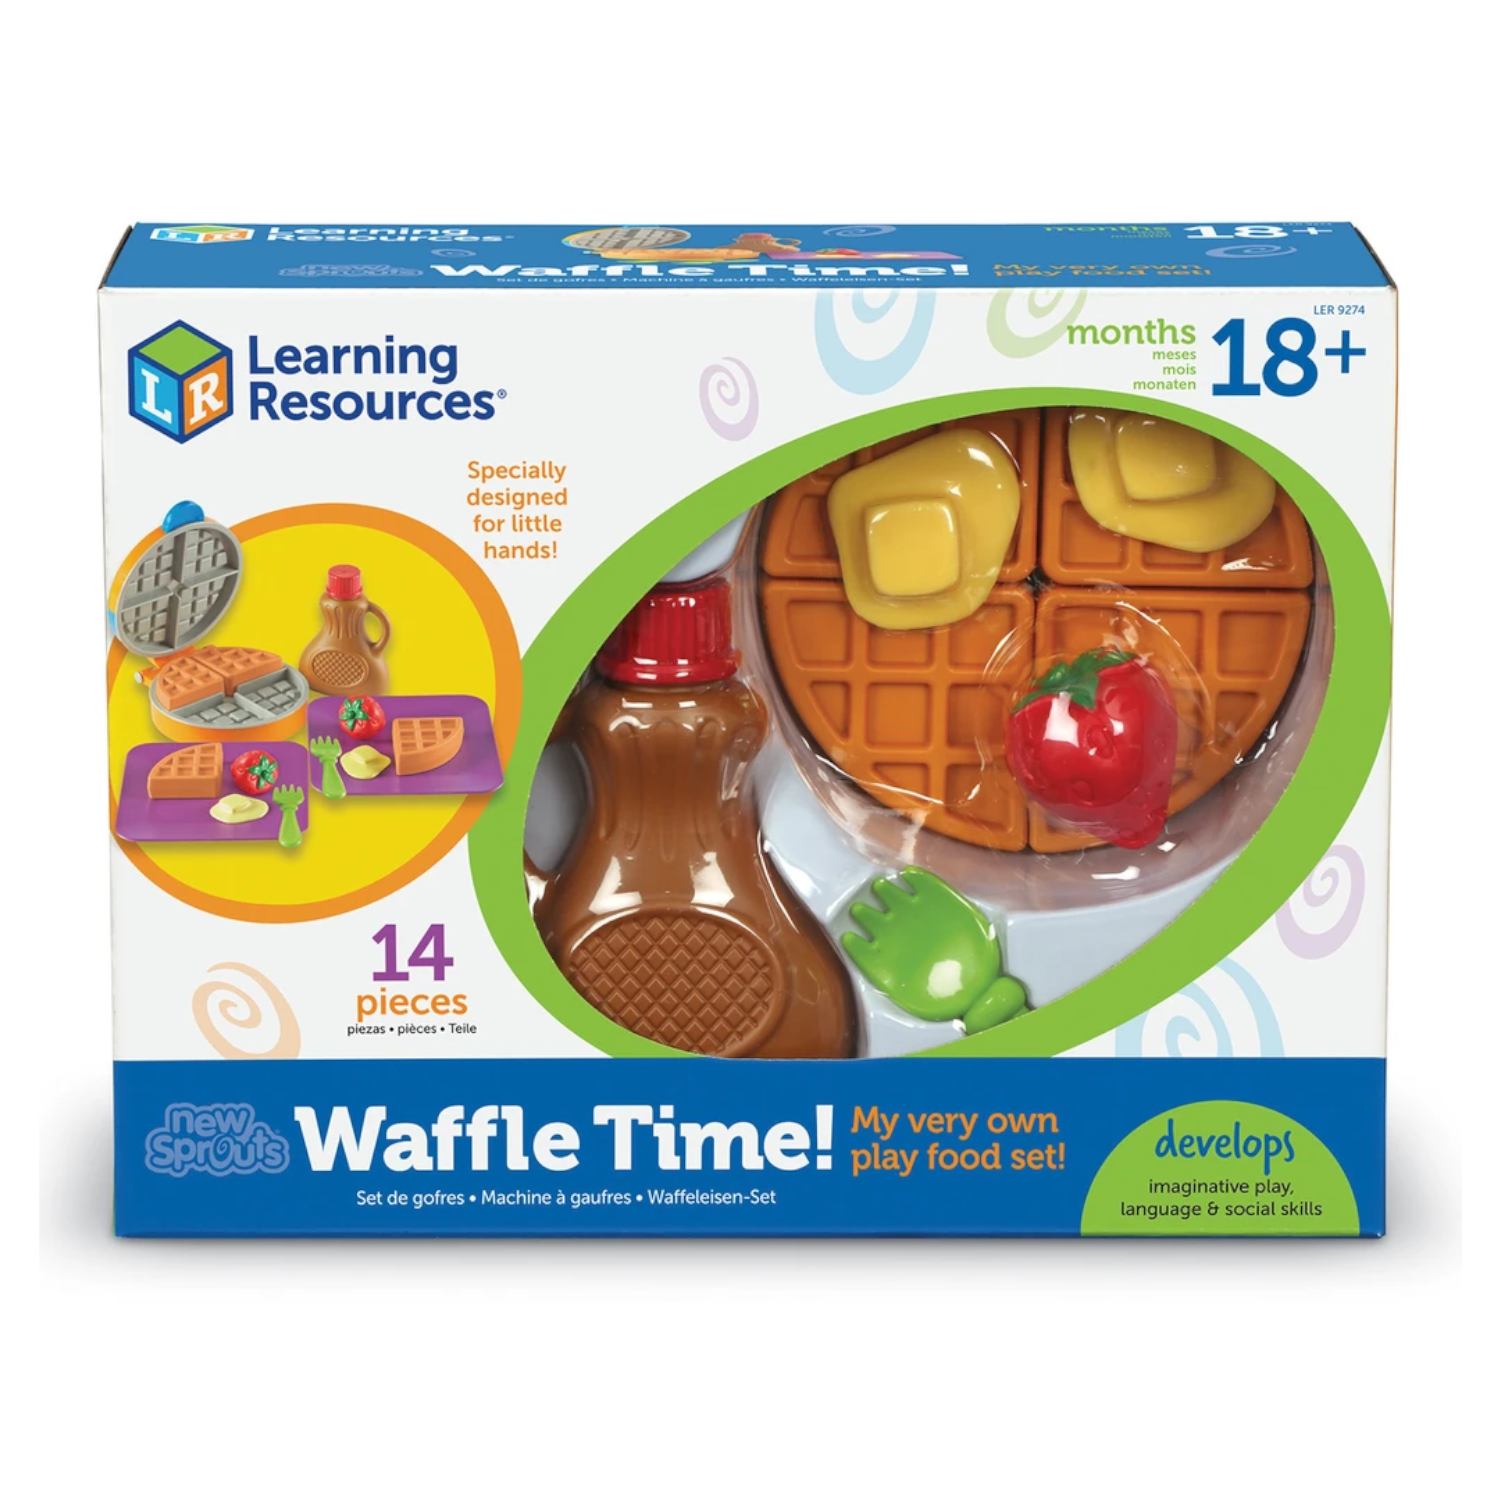 Learning Resources | New Sprouts: Waffle Time! - Castle Toys